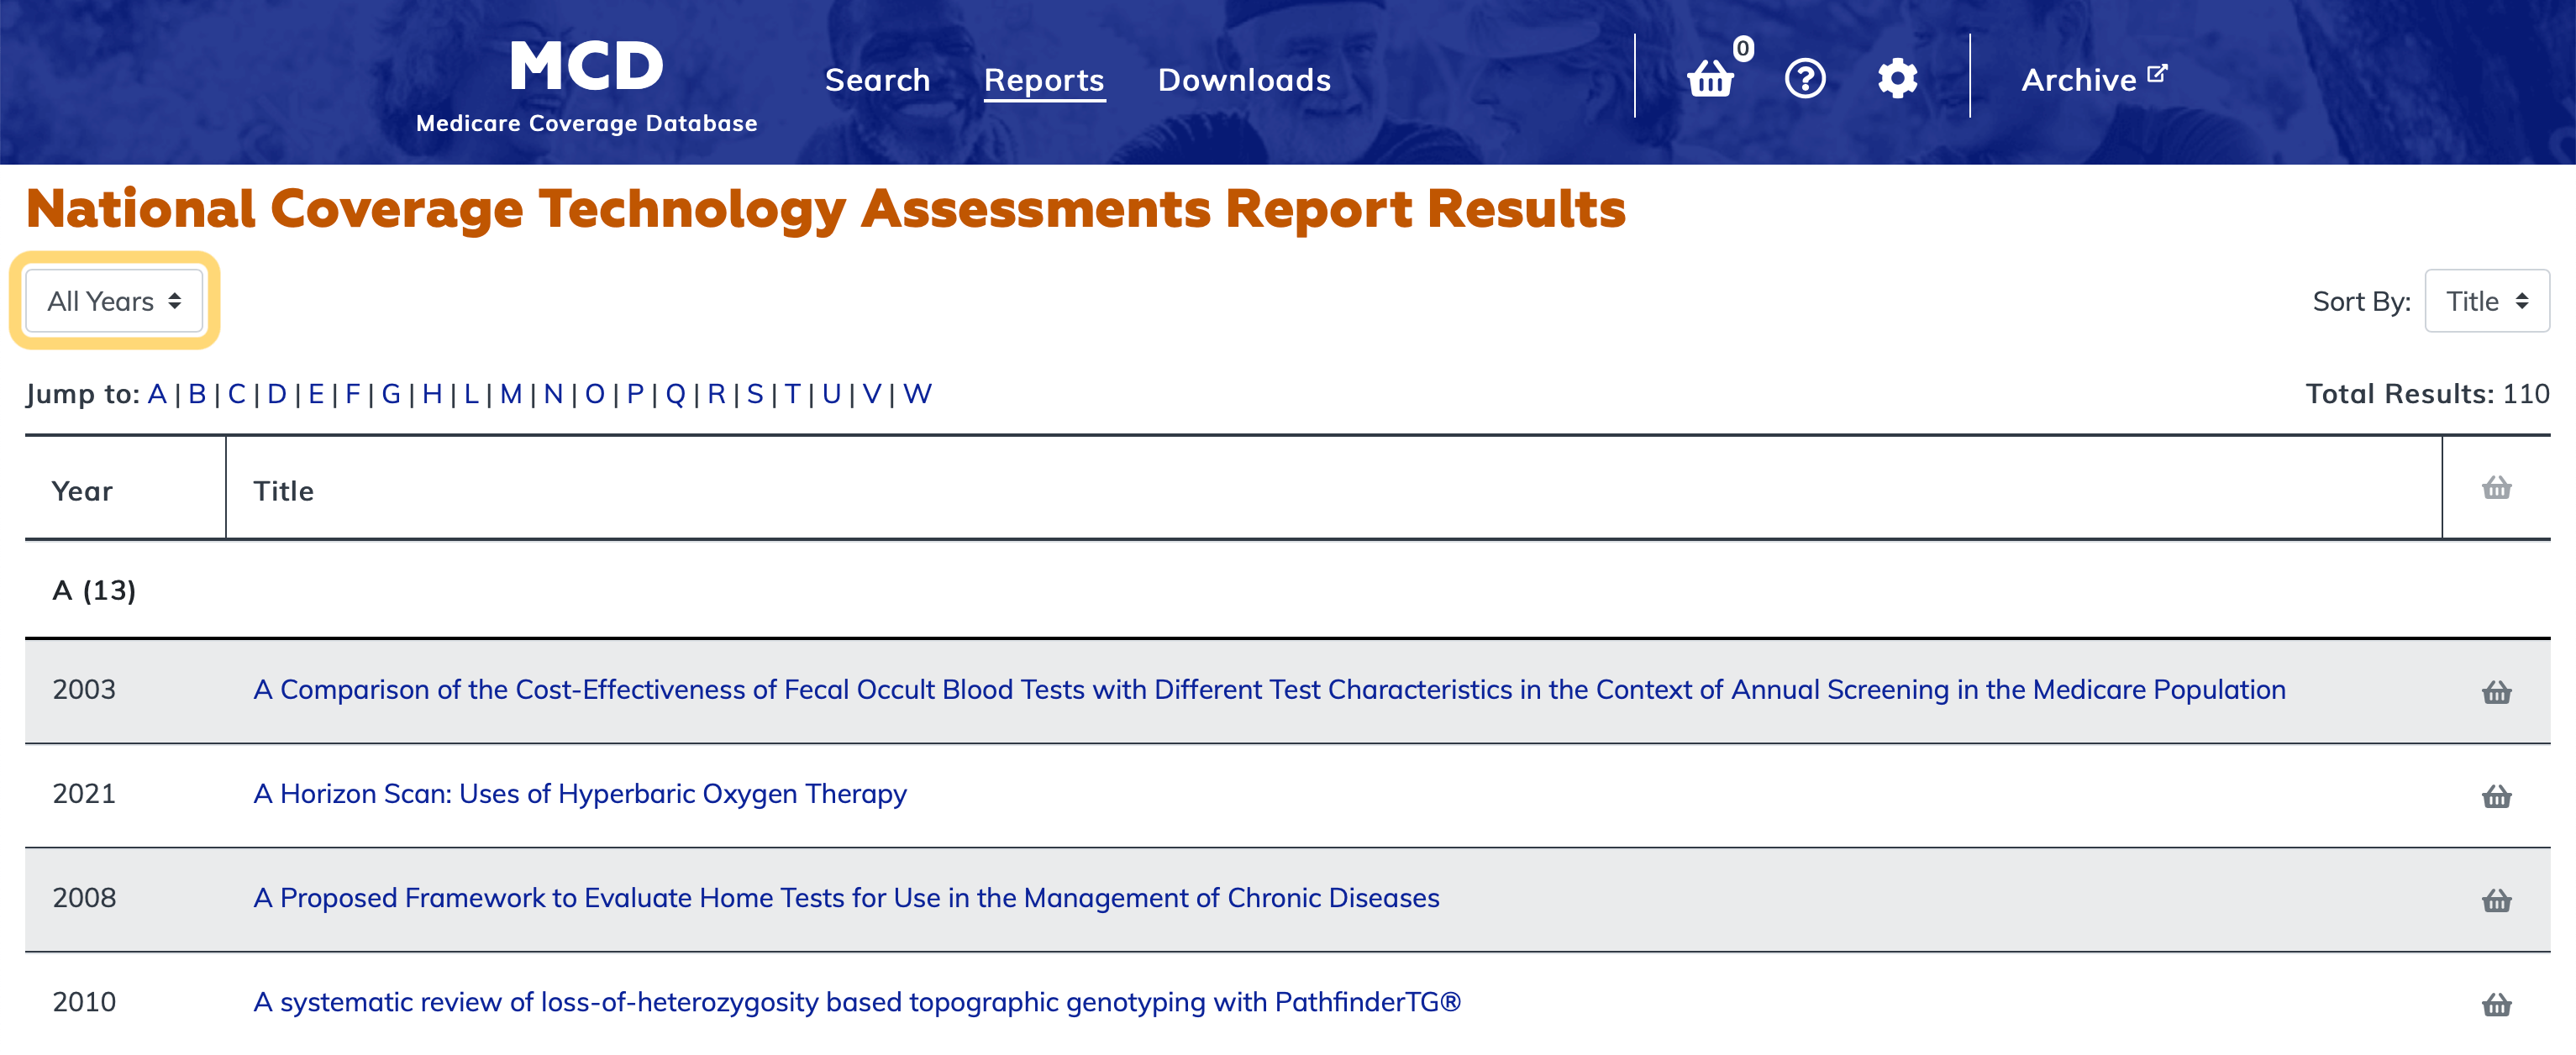 National Coverage Technology Assessments Report filter bar highlighted